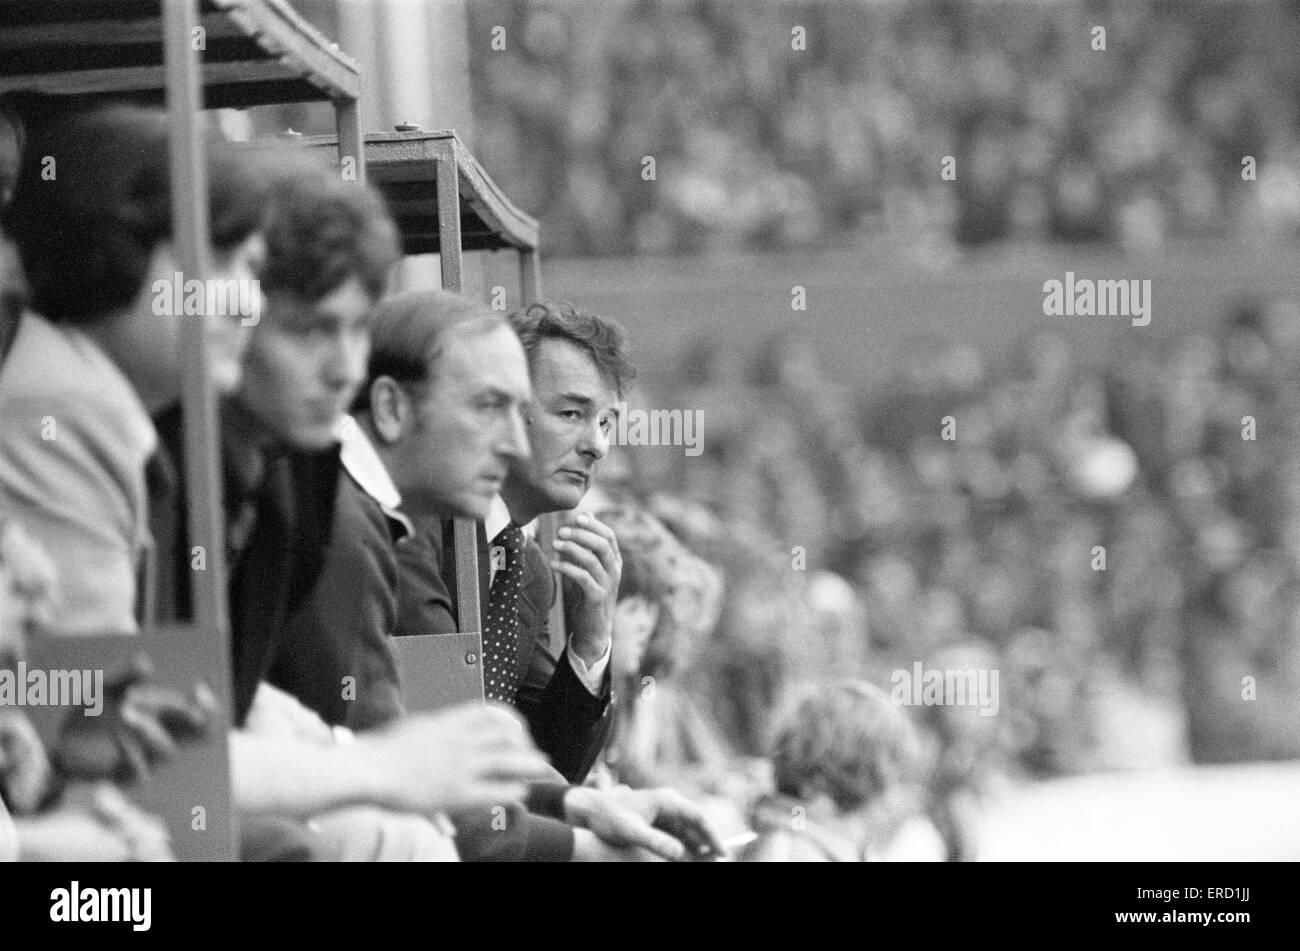 FA Cup Quarter Final match at the Hawthorns. West Bromwich Albion 2 v Nottingham Forest 0.  Forest manager Brian Clough watching the action from the bench.  11th March 1978. Stock Photo